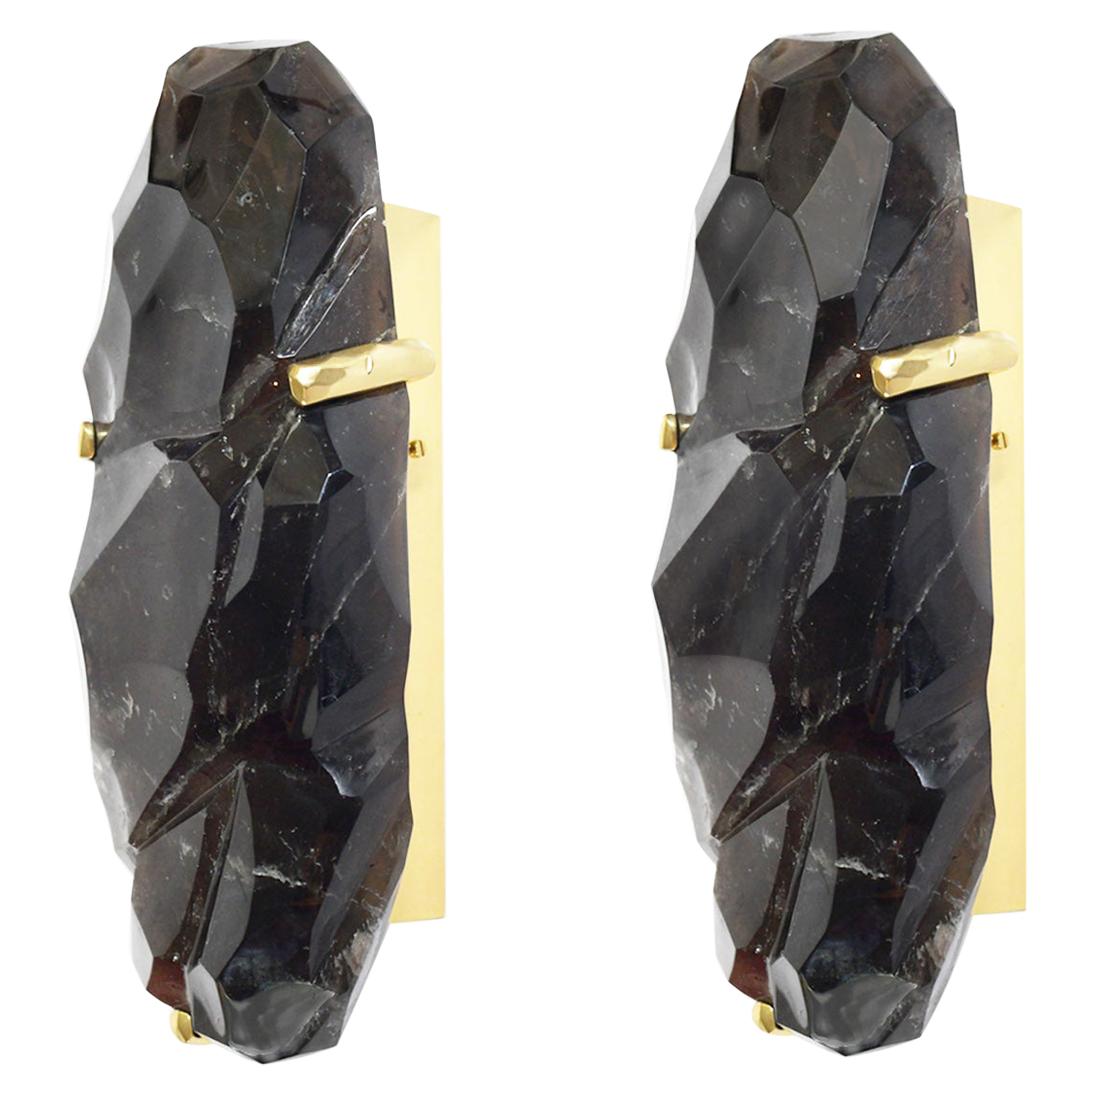 Multifaceted Smoky Rock Crystal Sconces by Phoenix